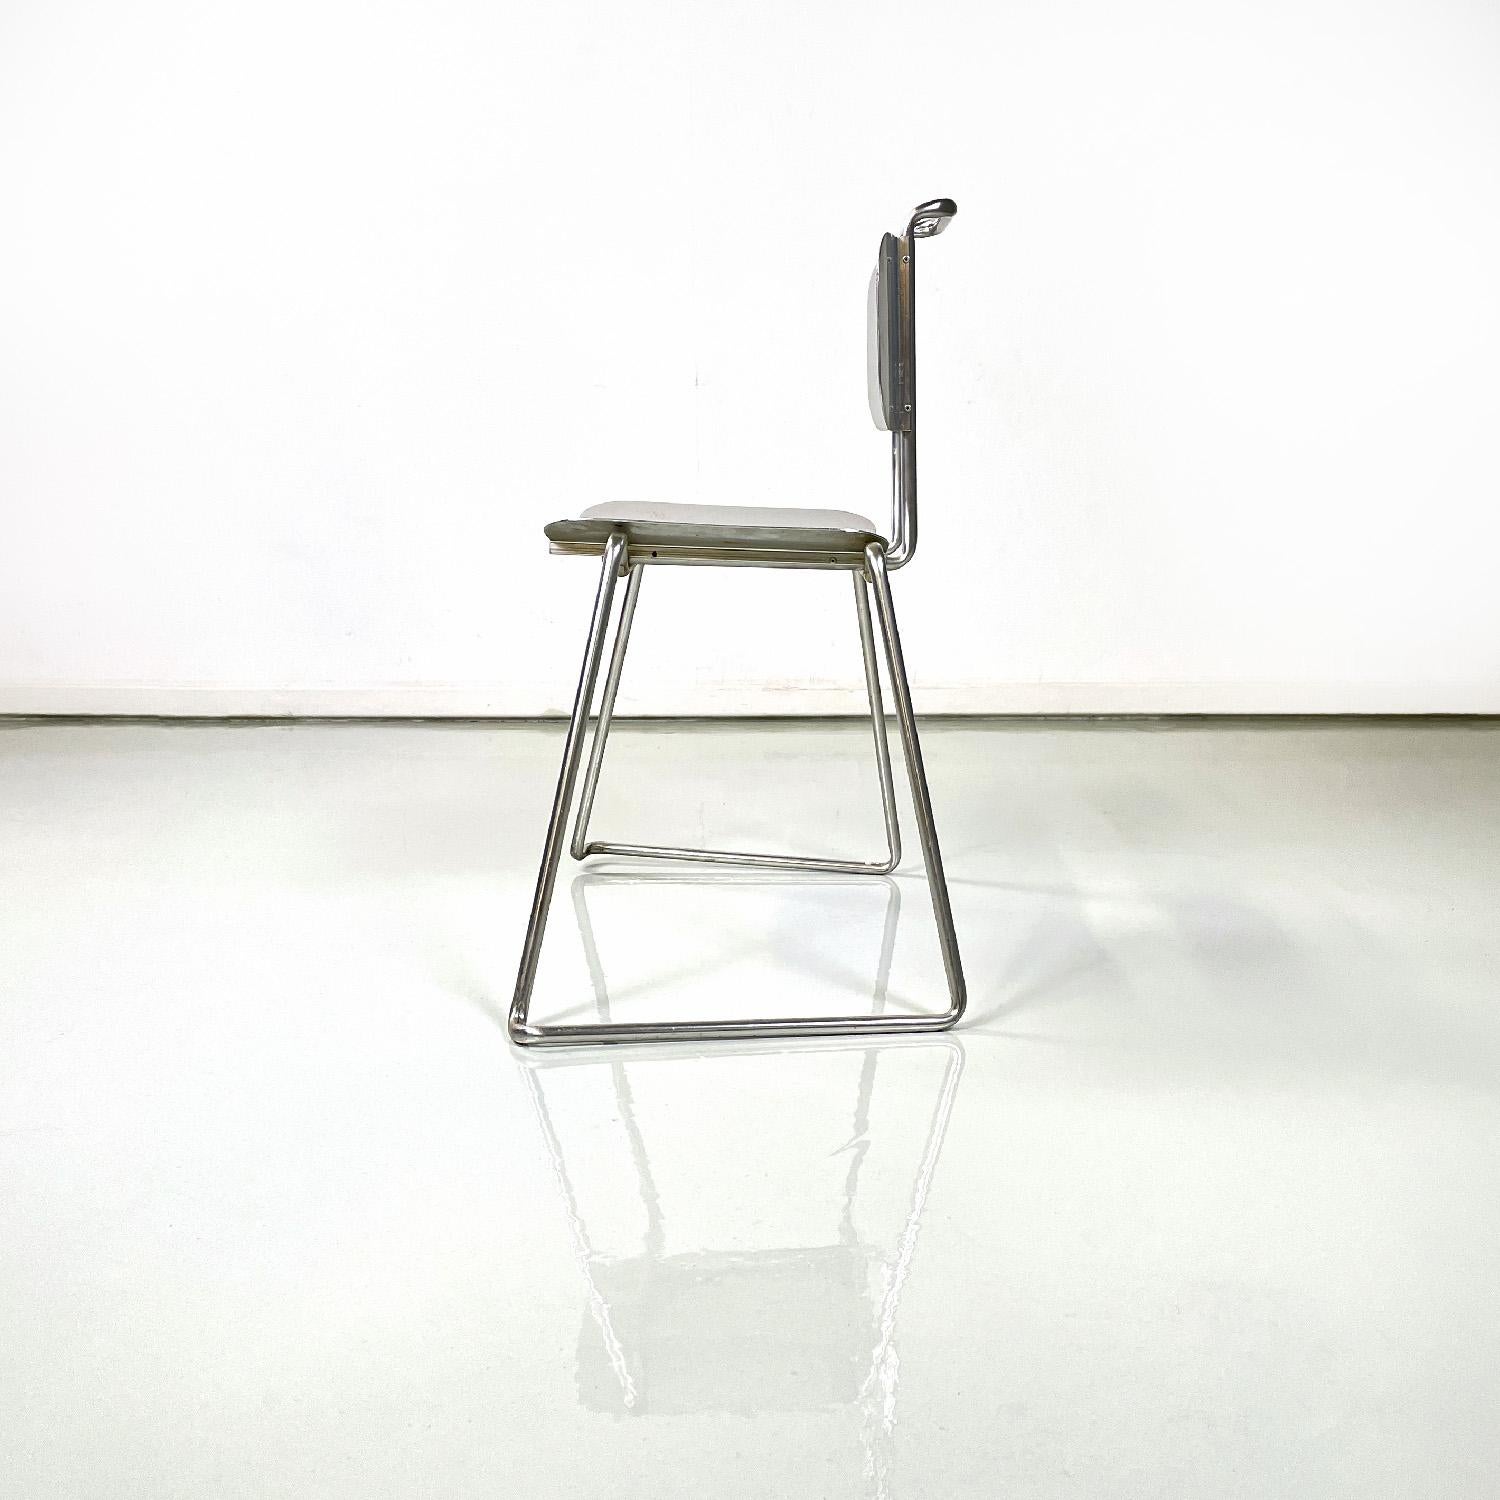 Italian modern rectangular aluminum chair, 1980s
Chair with rectangular base entirely in aluminium. The seat and backrest are rectangular with rounded corners and have two 